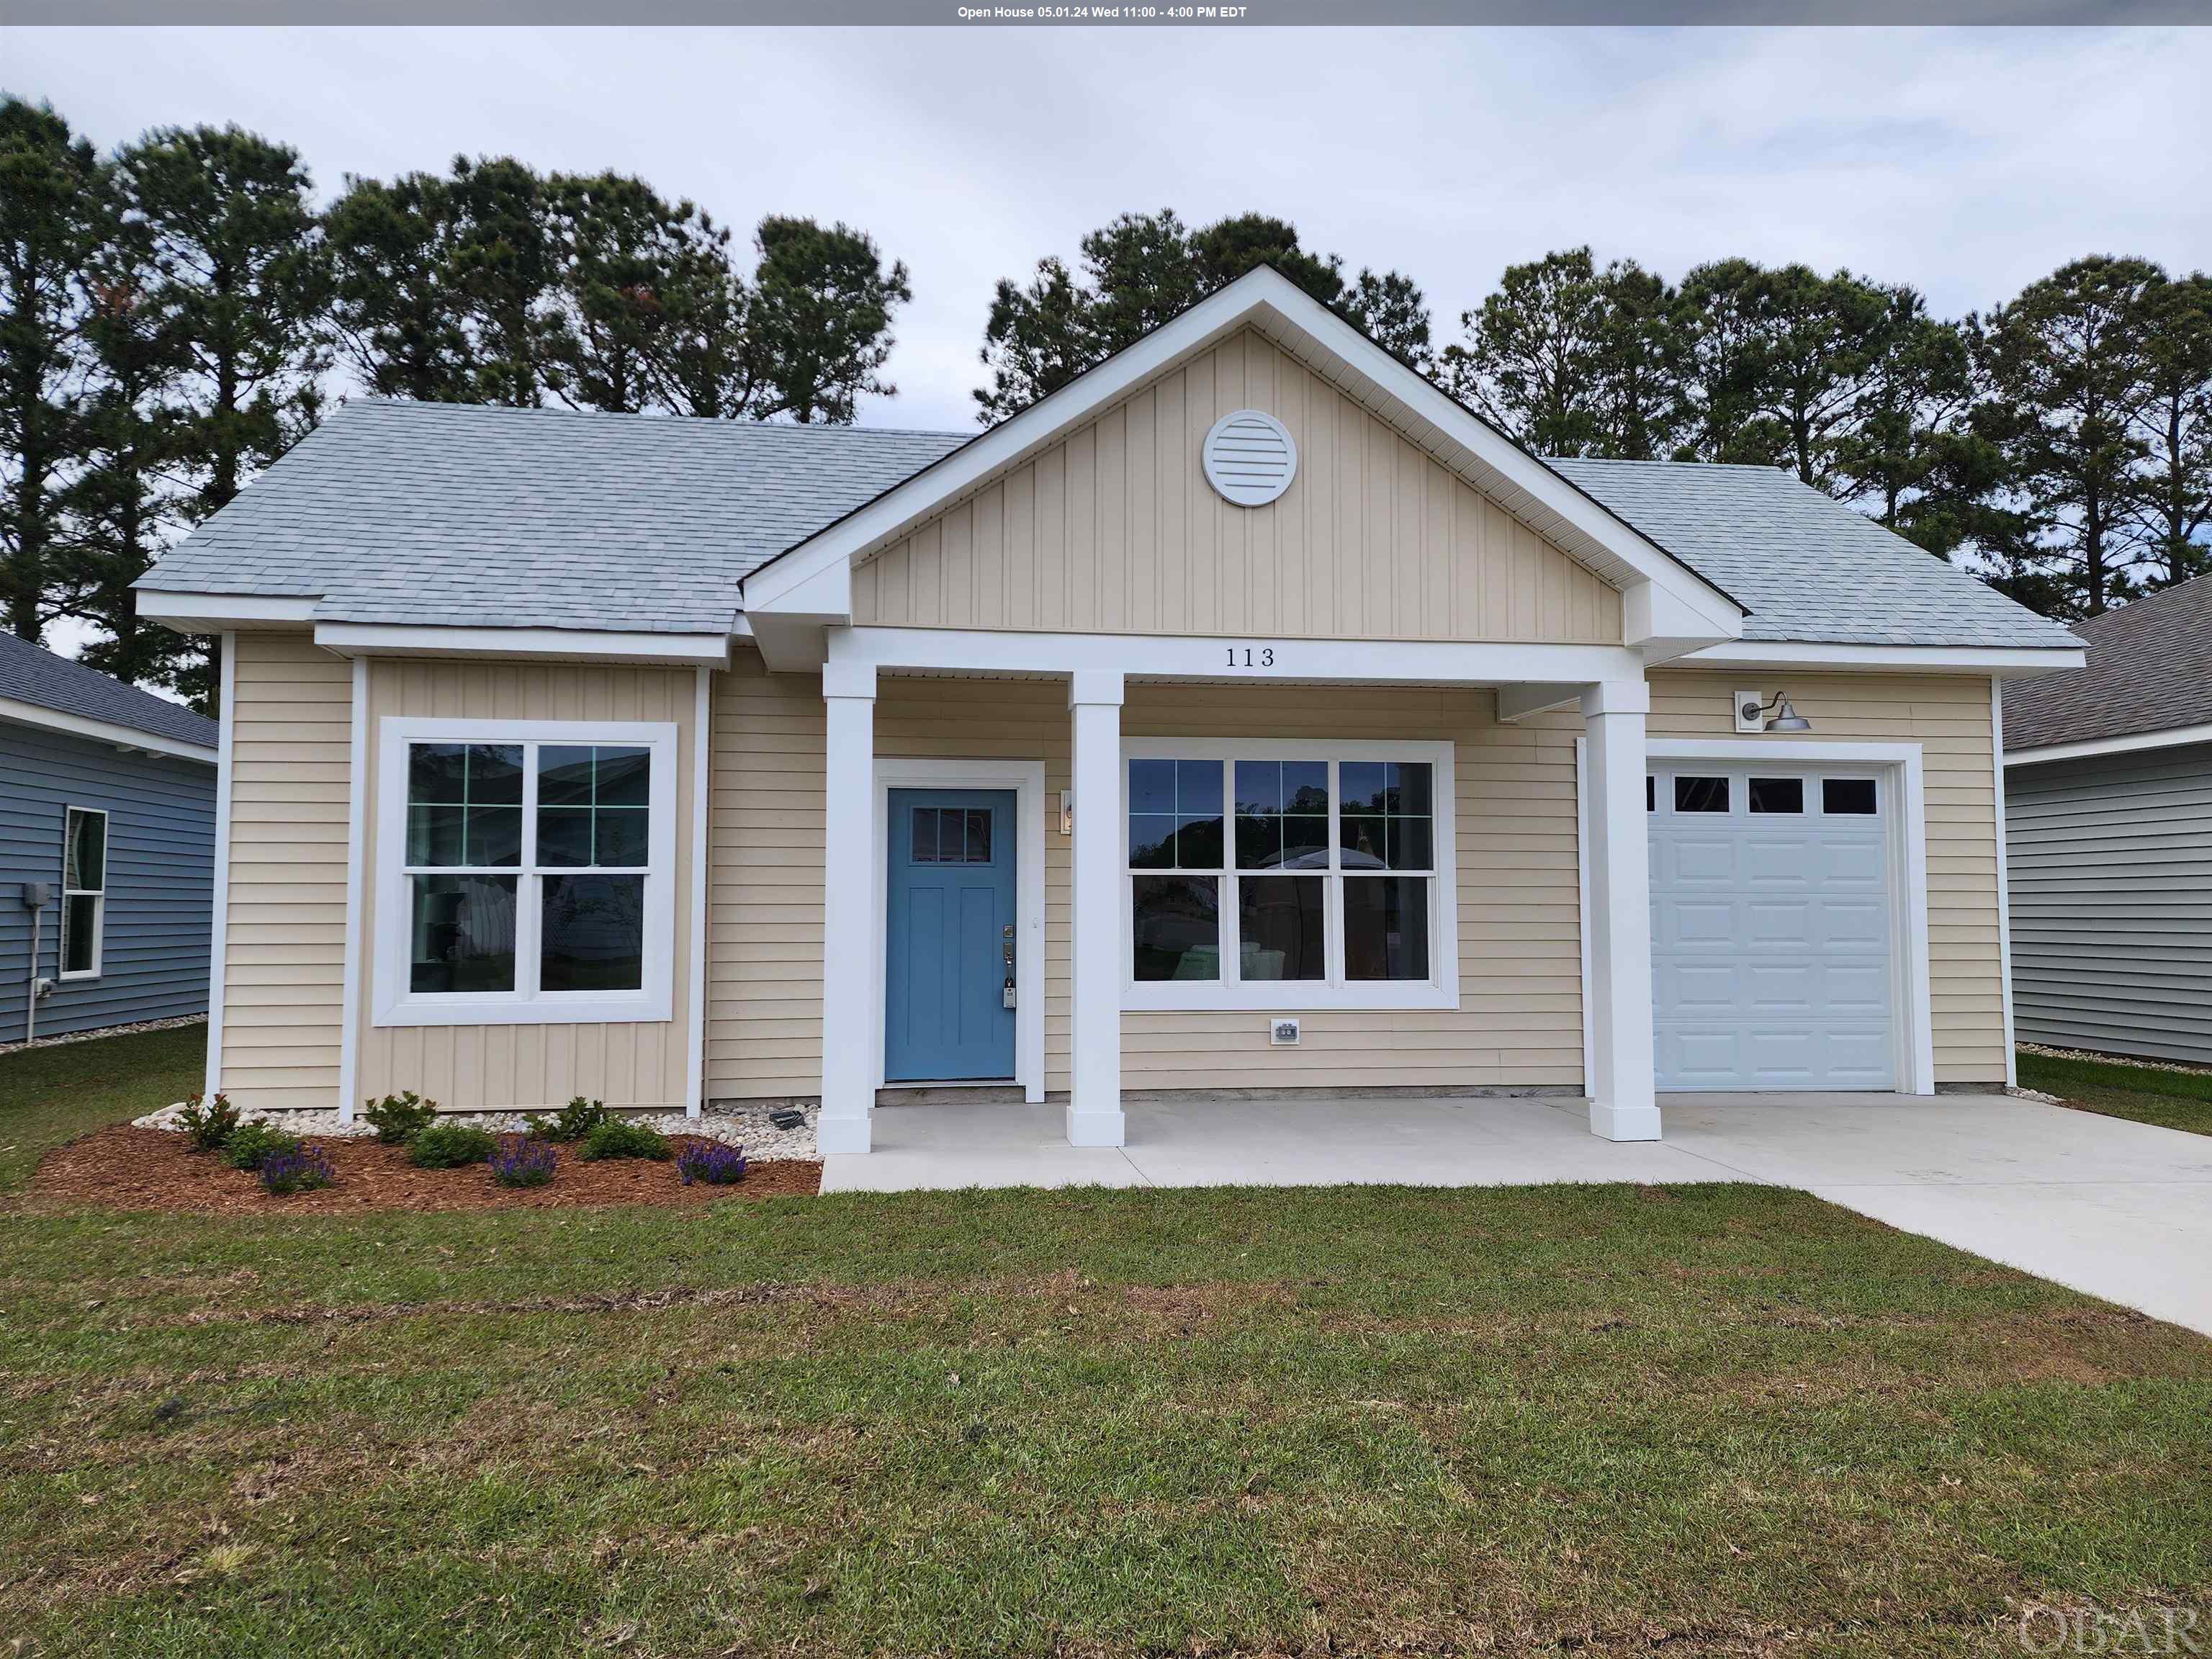 113 Pirate Quay Lane, Grandy, NC 27939, 3 Bedrooms Bedrooms, ,2 BathroomsBathrooms,Residential,For sale,Pirate Quay Lane,125440